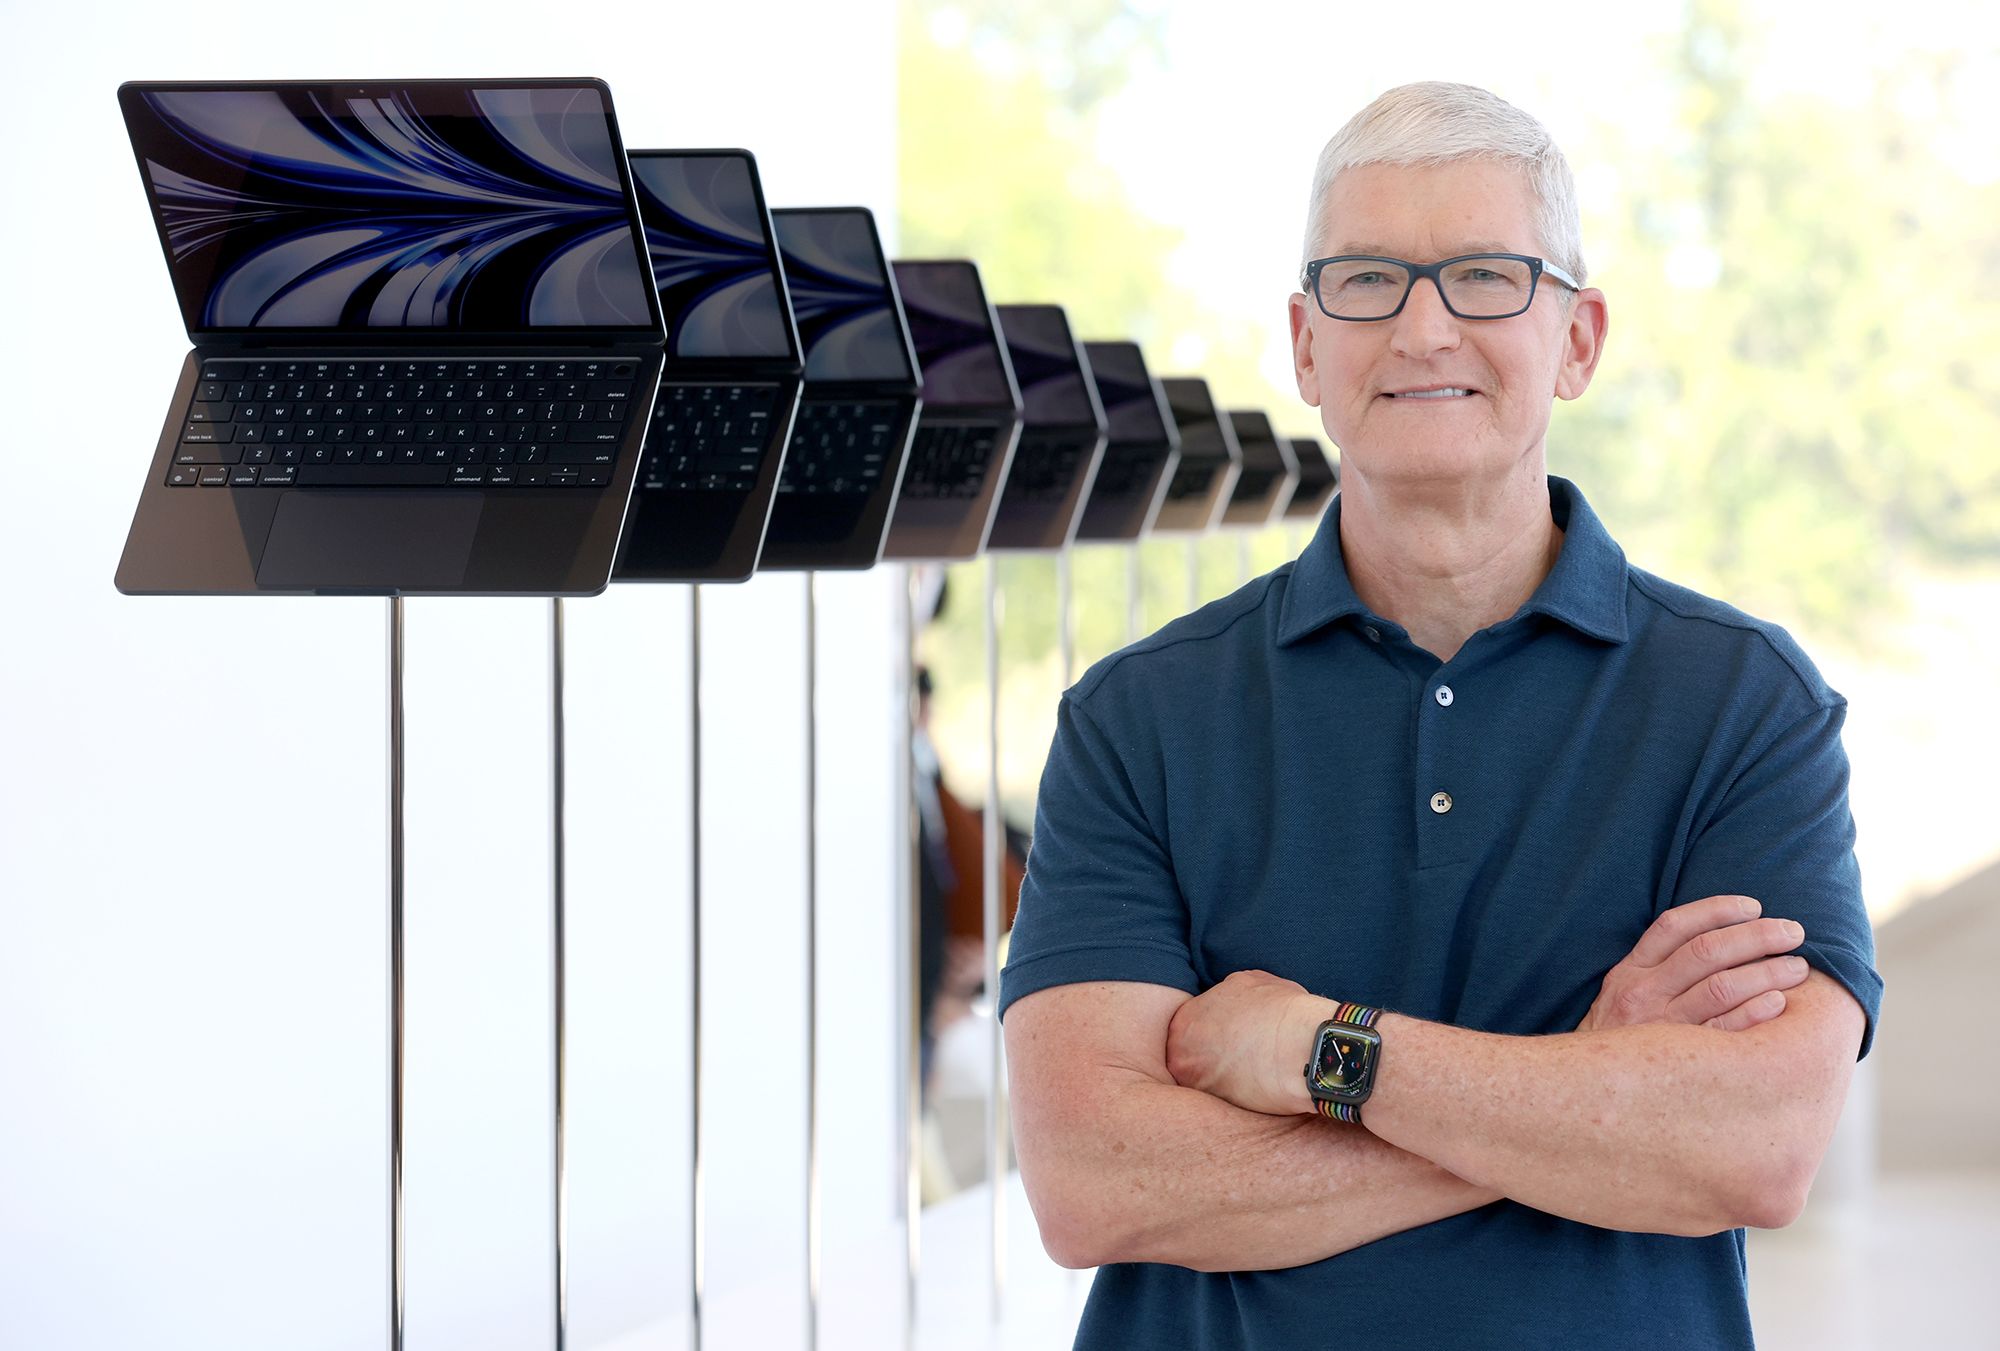 Everything Apple announced at its October 'Scary Fast' event (and what  wasn't unveiled)